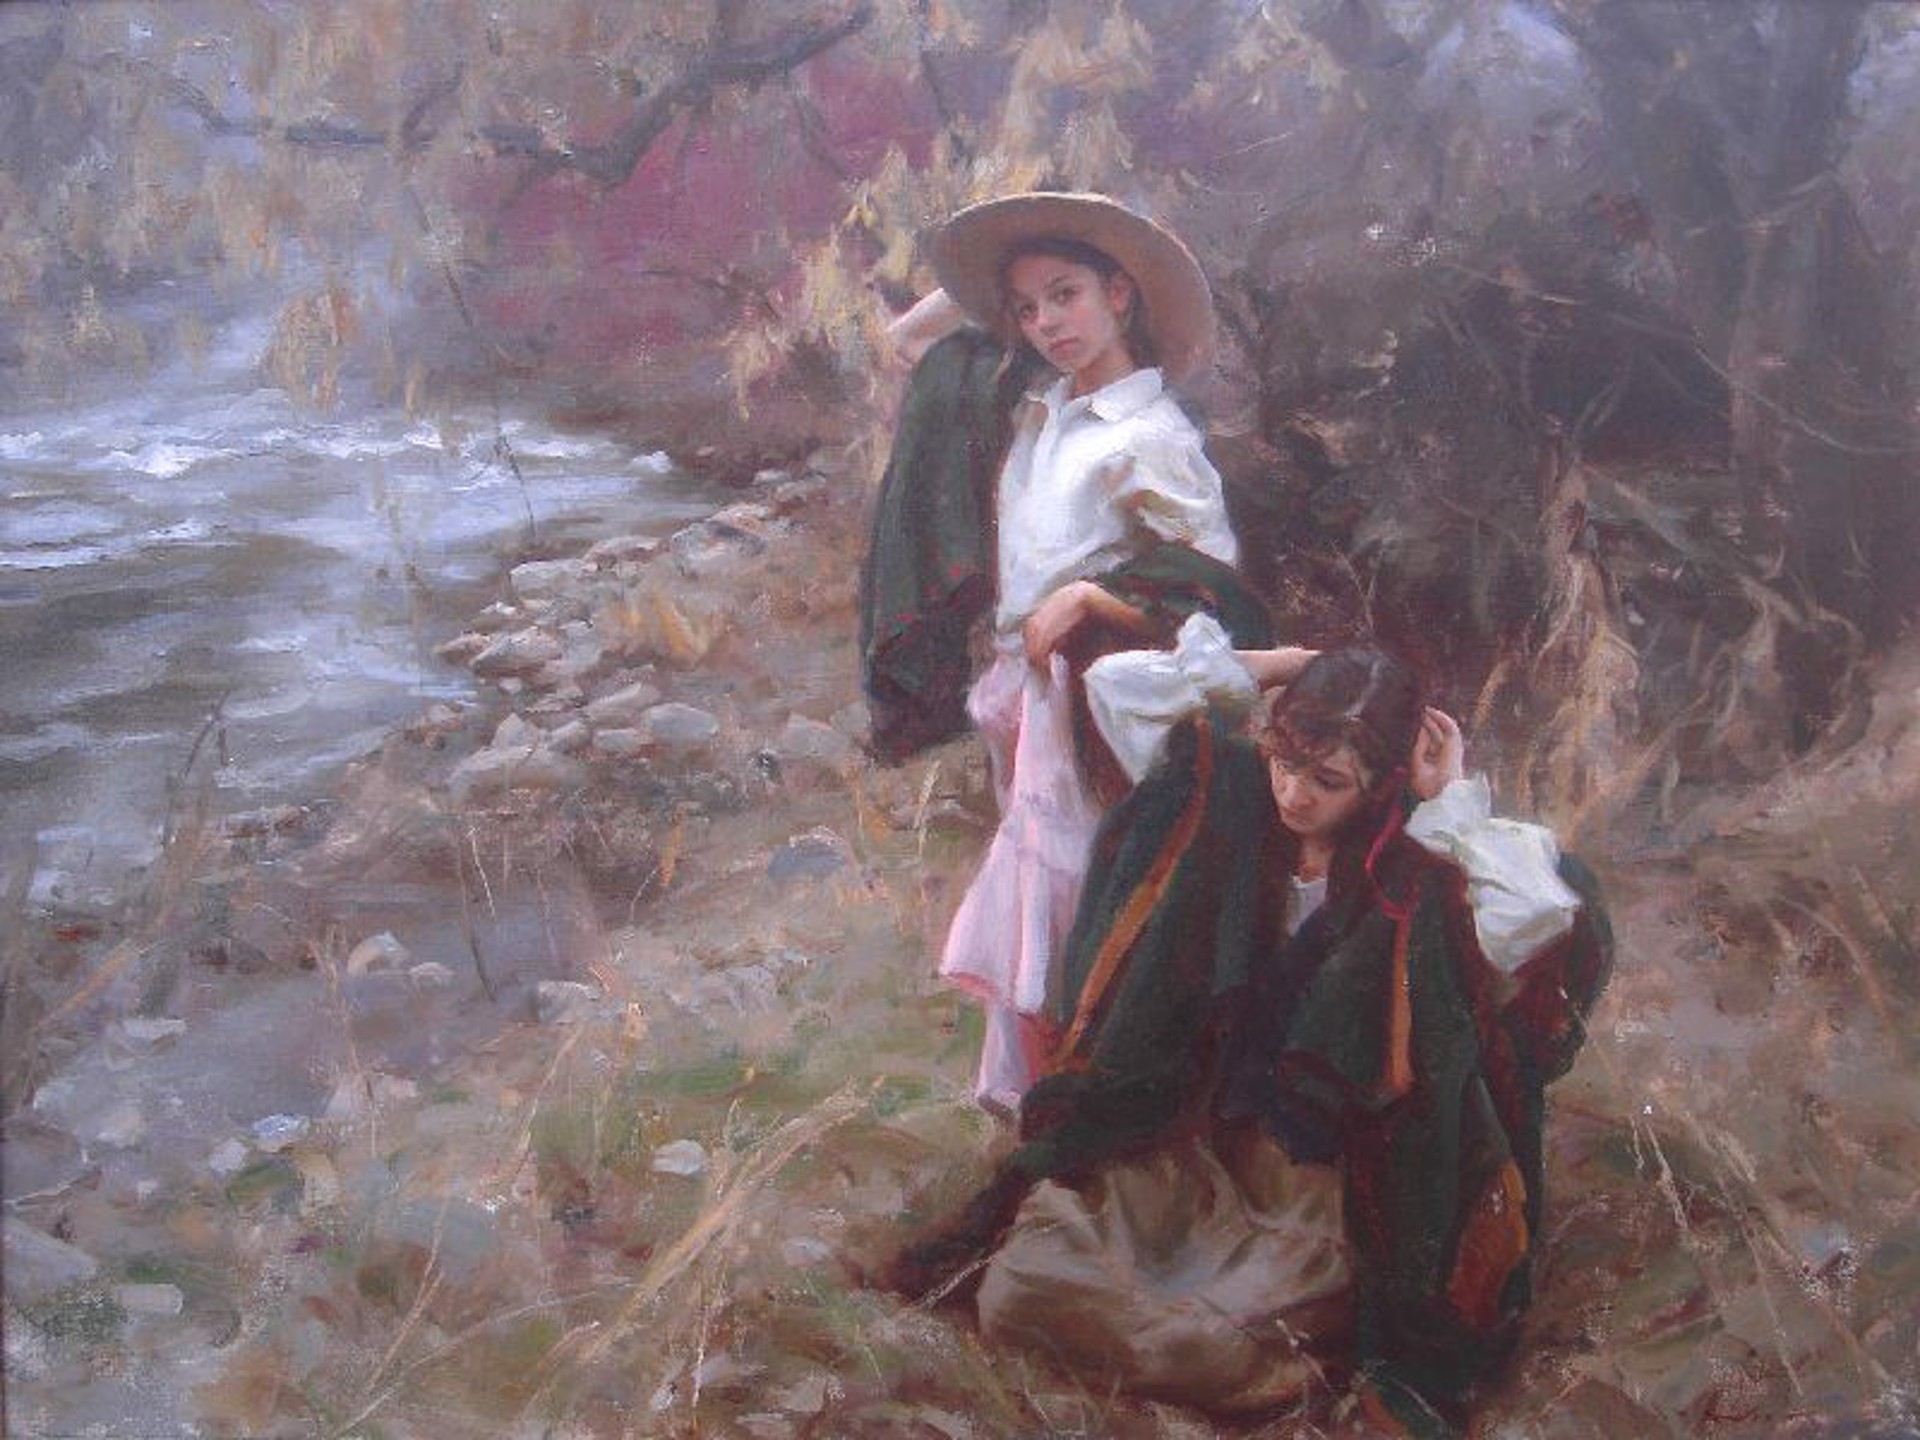 Afternoon in Avon by Mike Malm